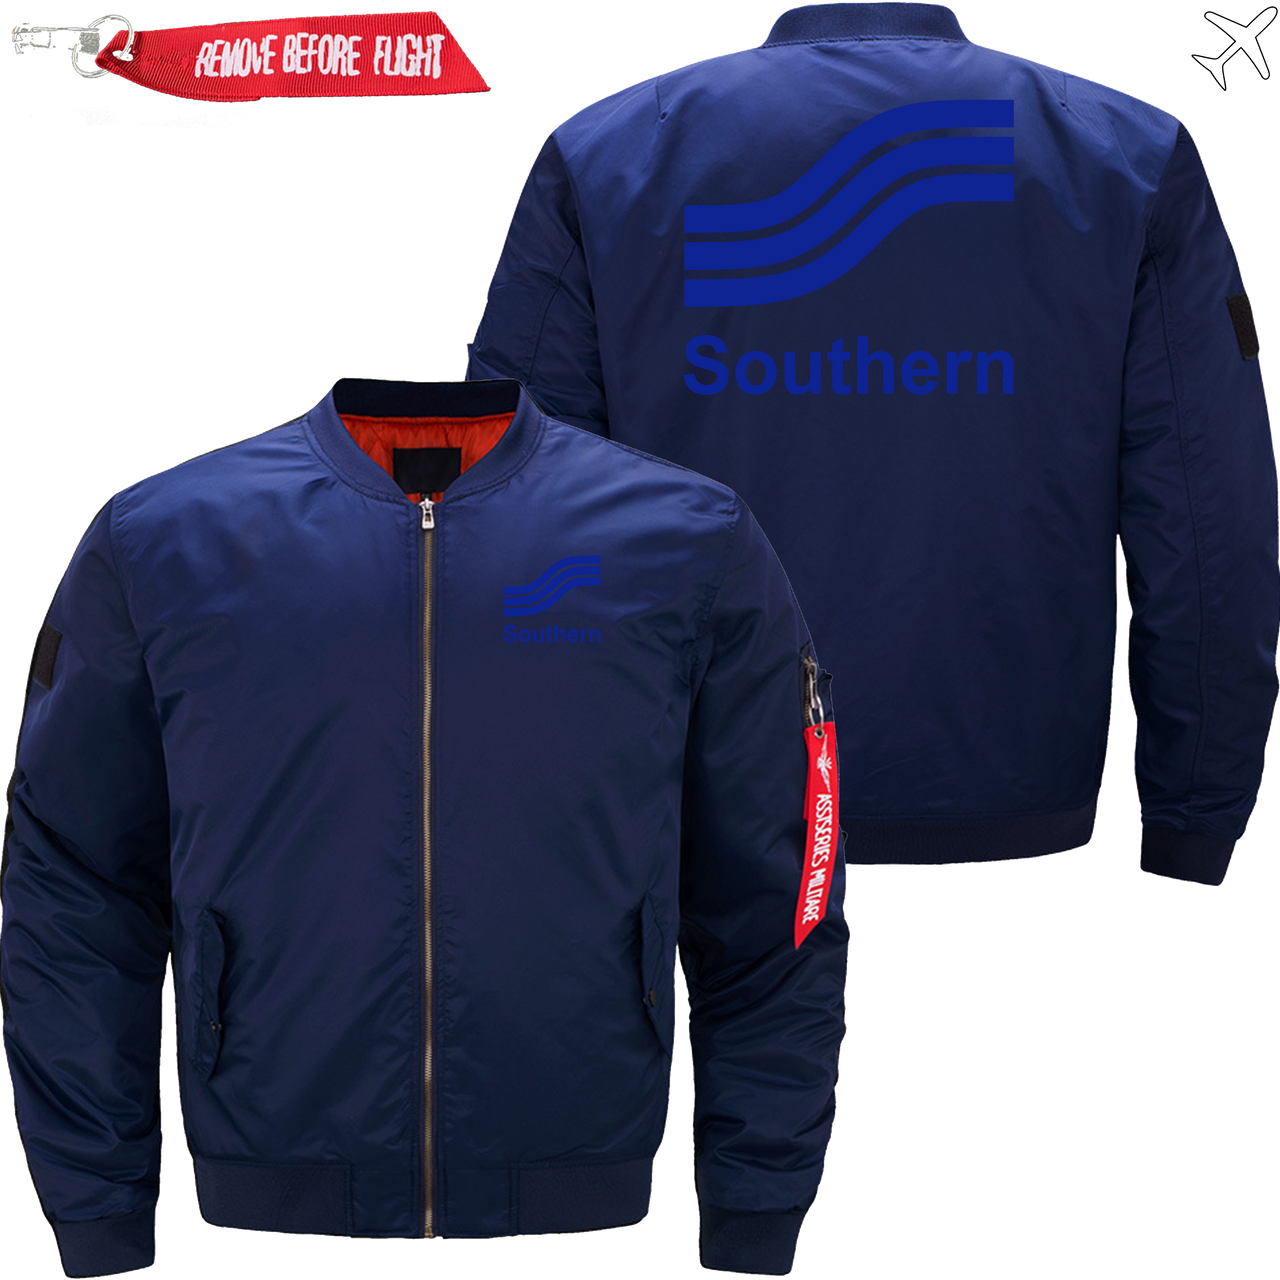 SOUTHERN AIRLINE JACKE